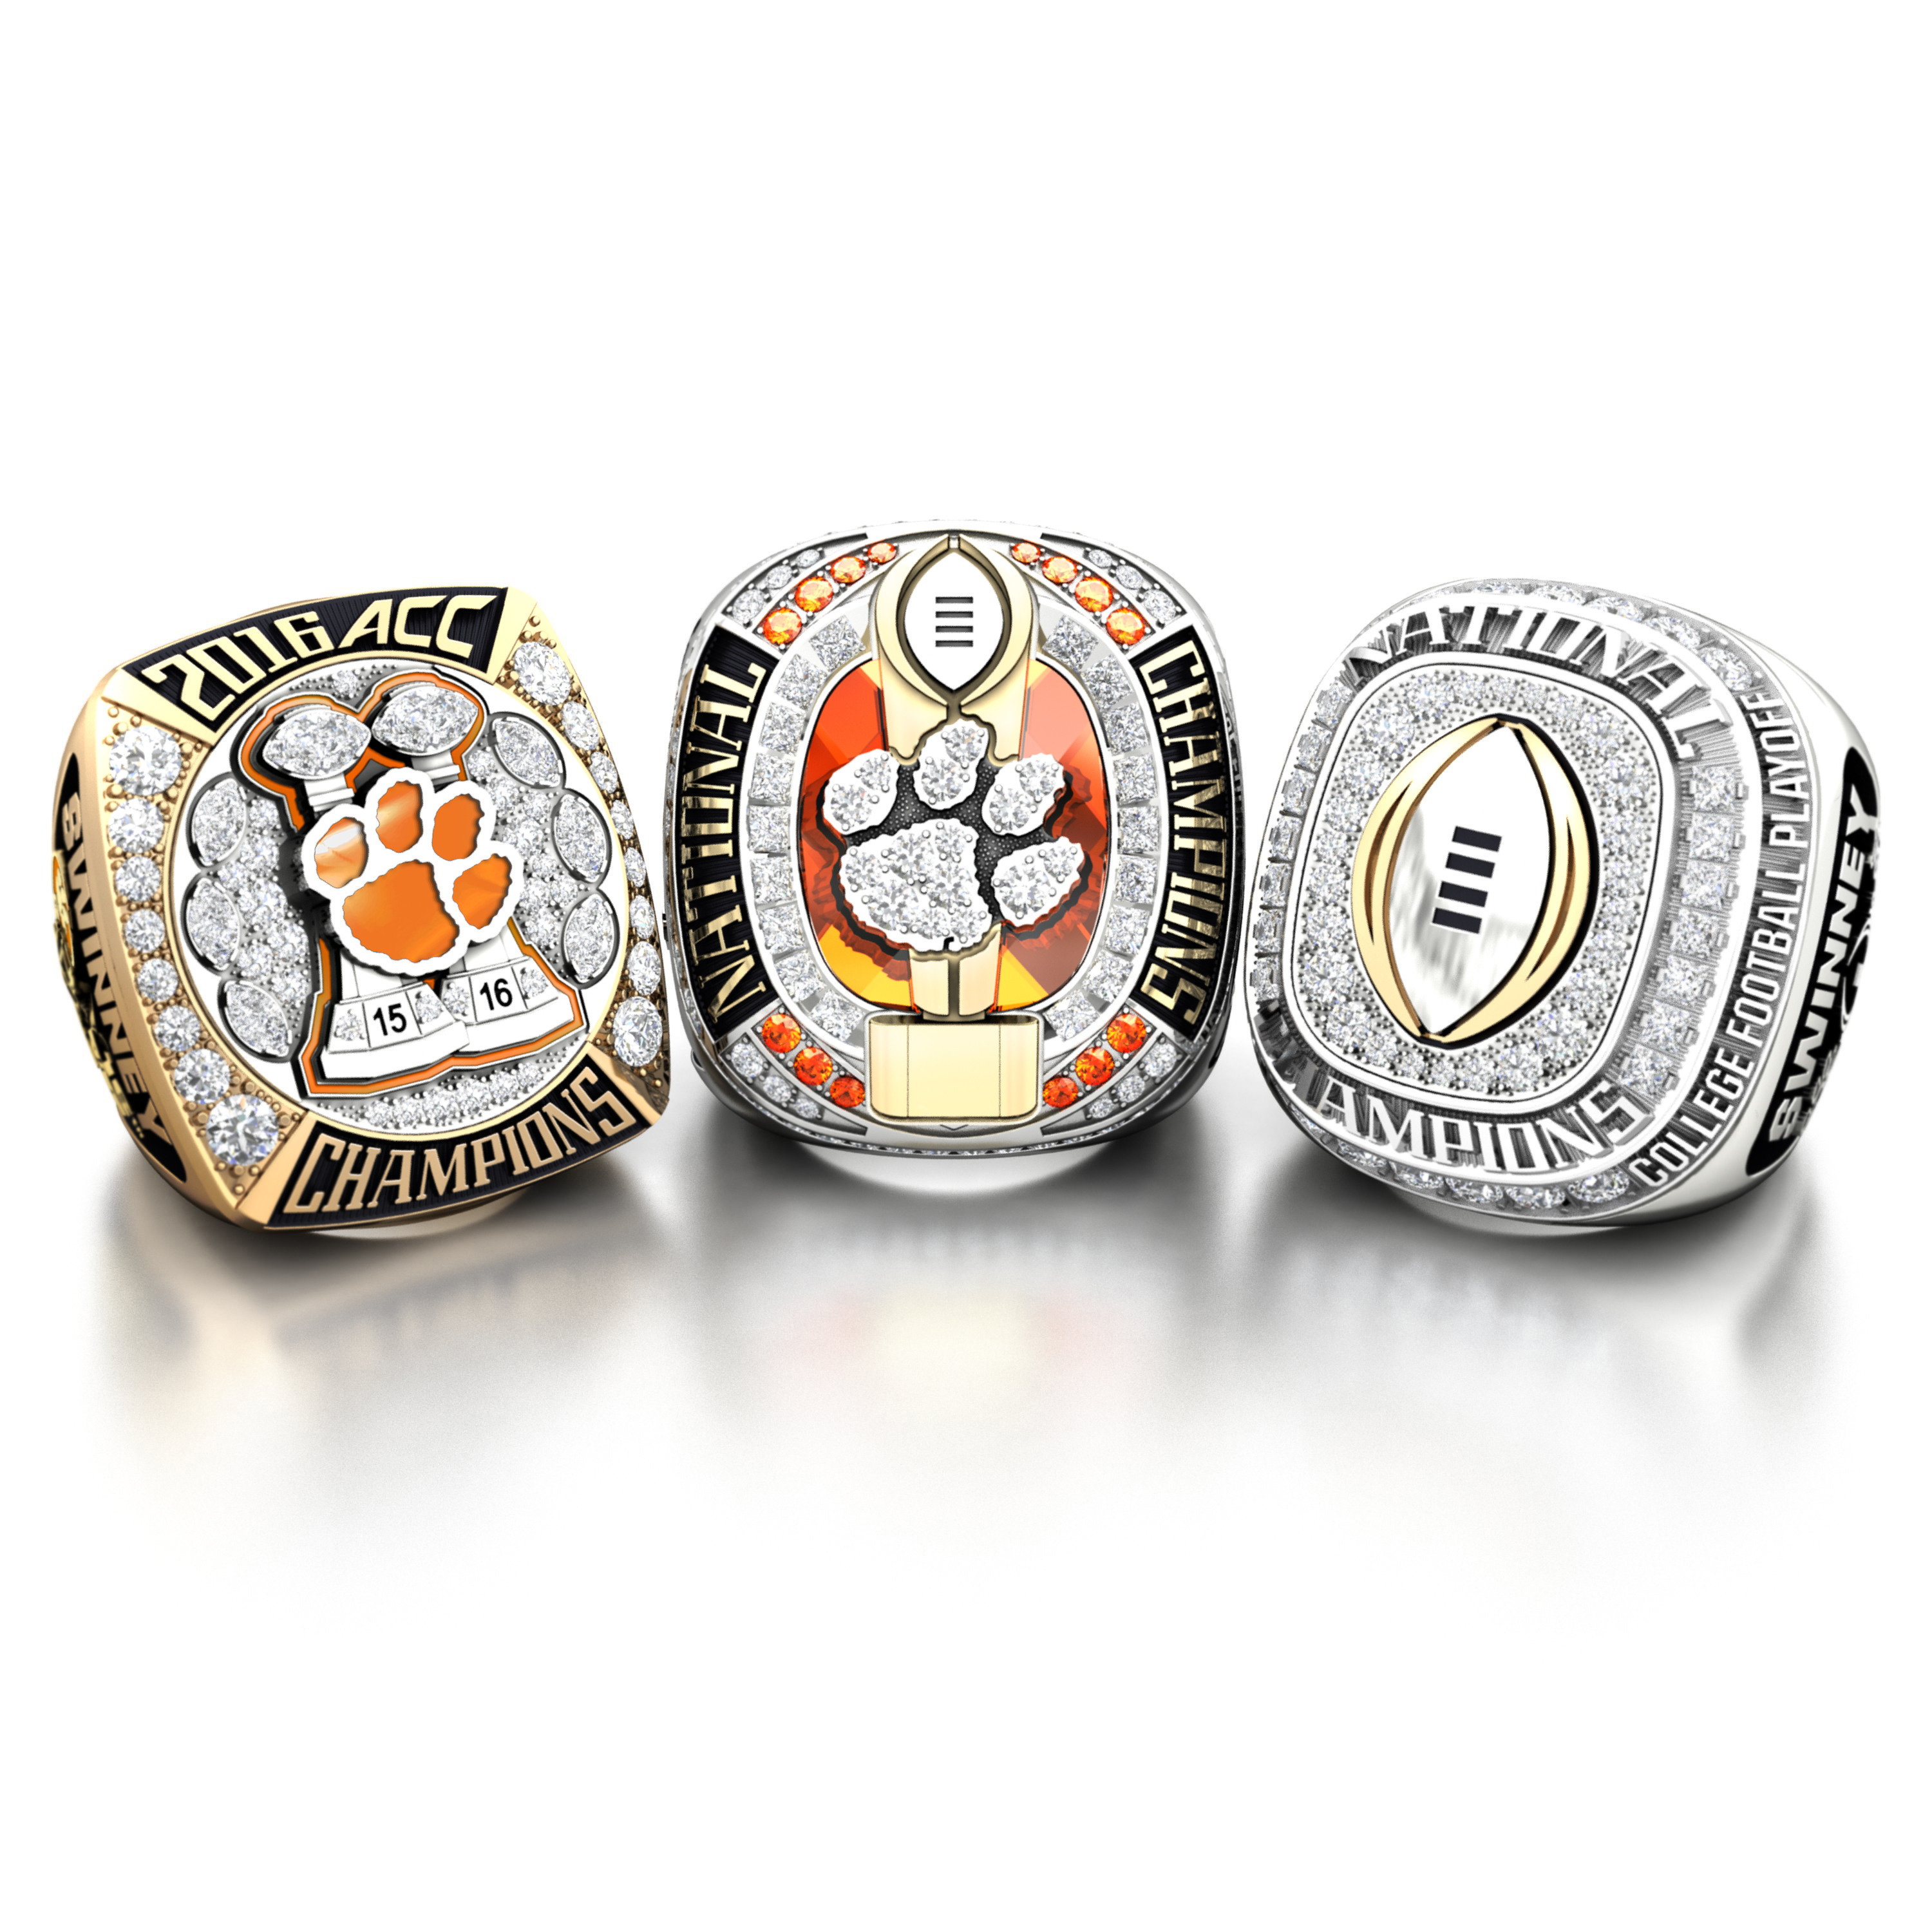 Jostens Creates 2016 Champion Rings for Clemson Tigers